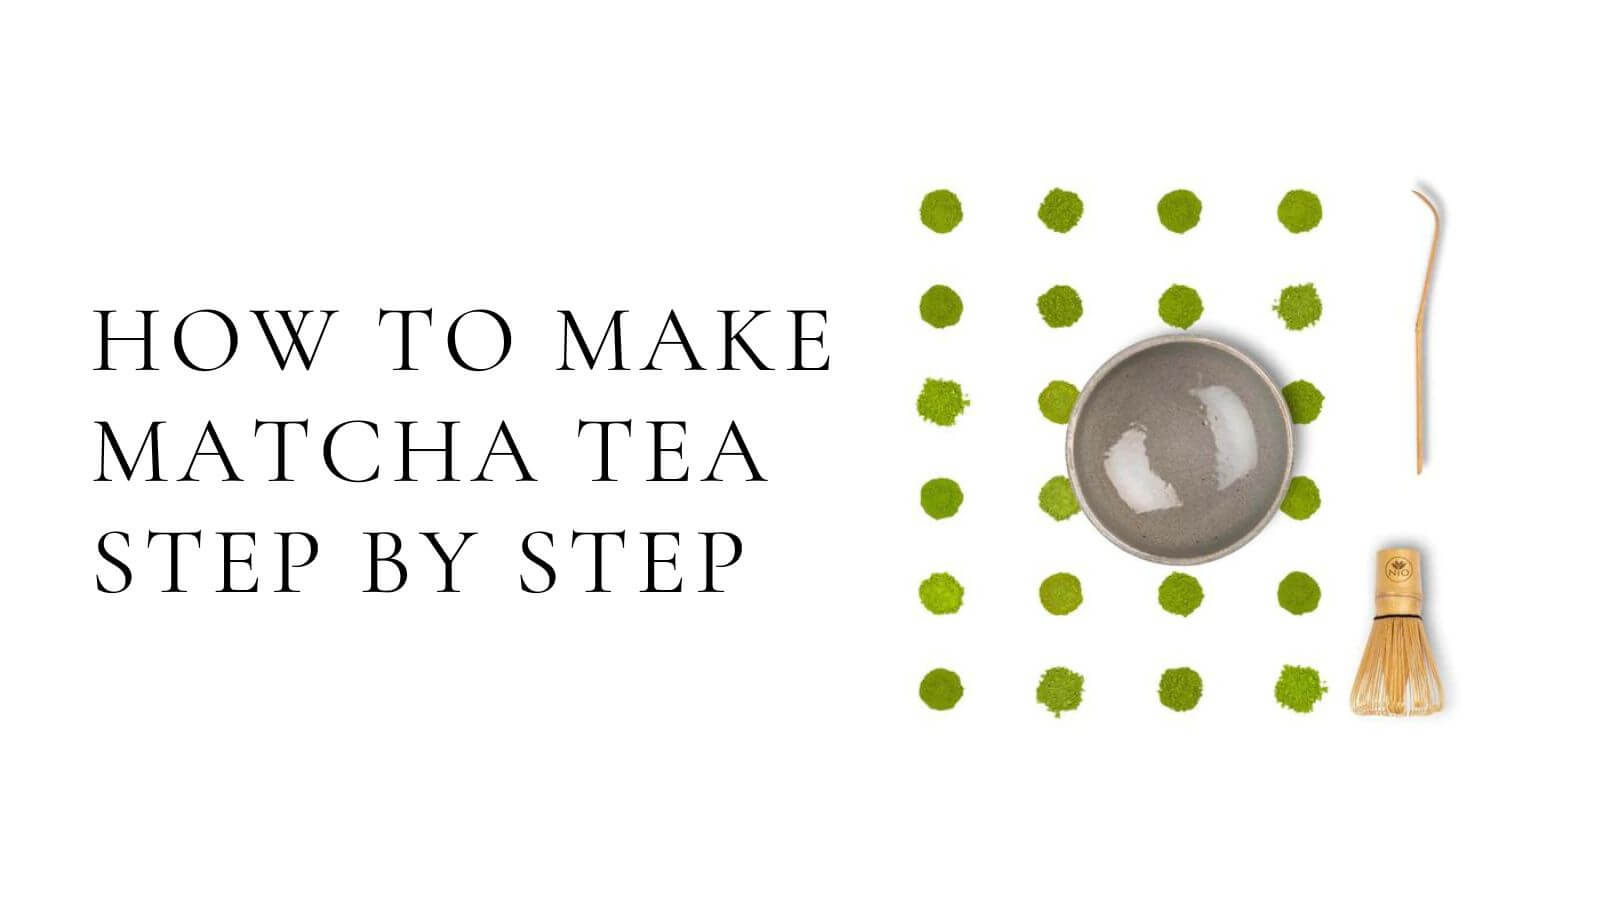 Load video: how to make matcha powder step by step